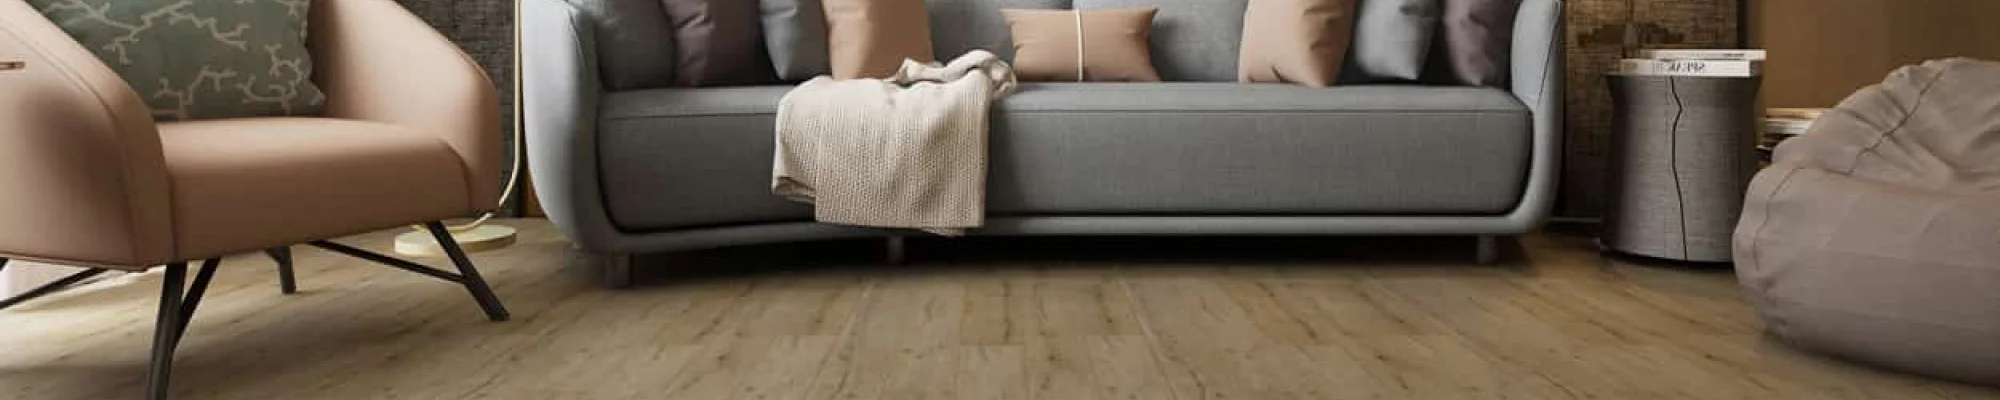 All about luxury vinyl flooring from your local flooring store | Sistare Carpets & Flooring  in Lancaster, SC